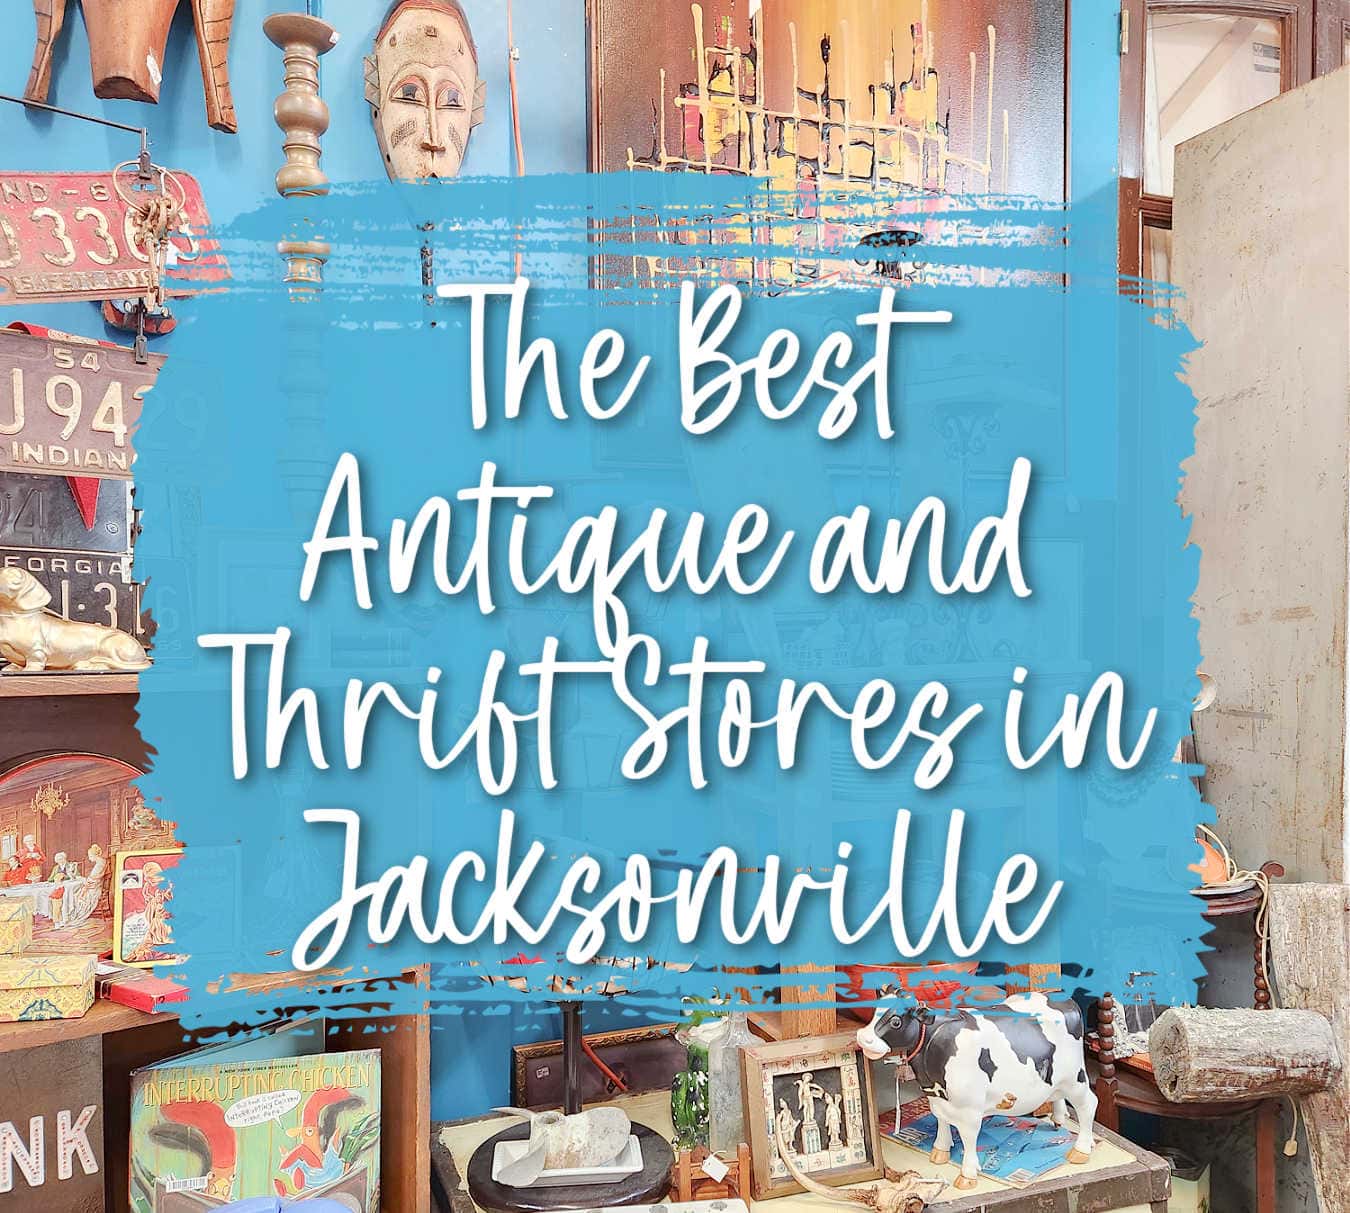 Antique and Thrift Stores in Jacksonville